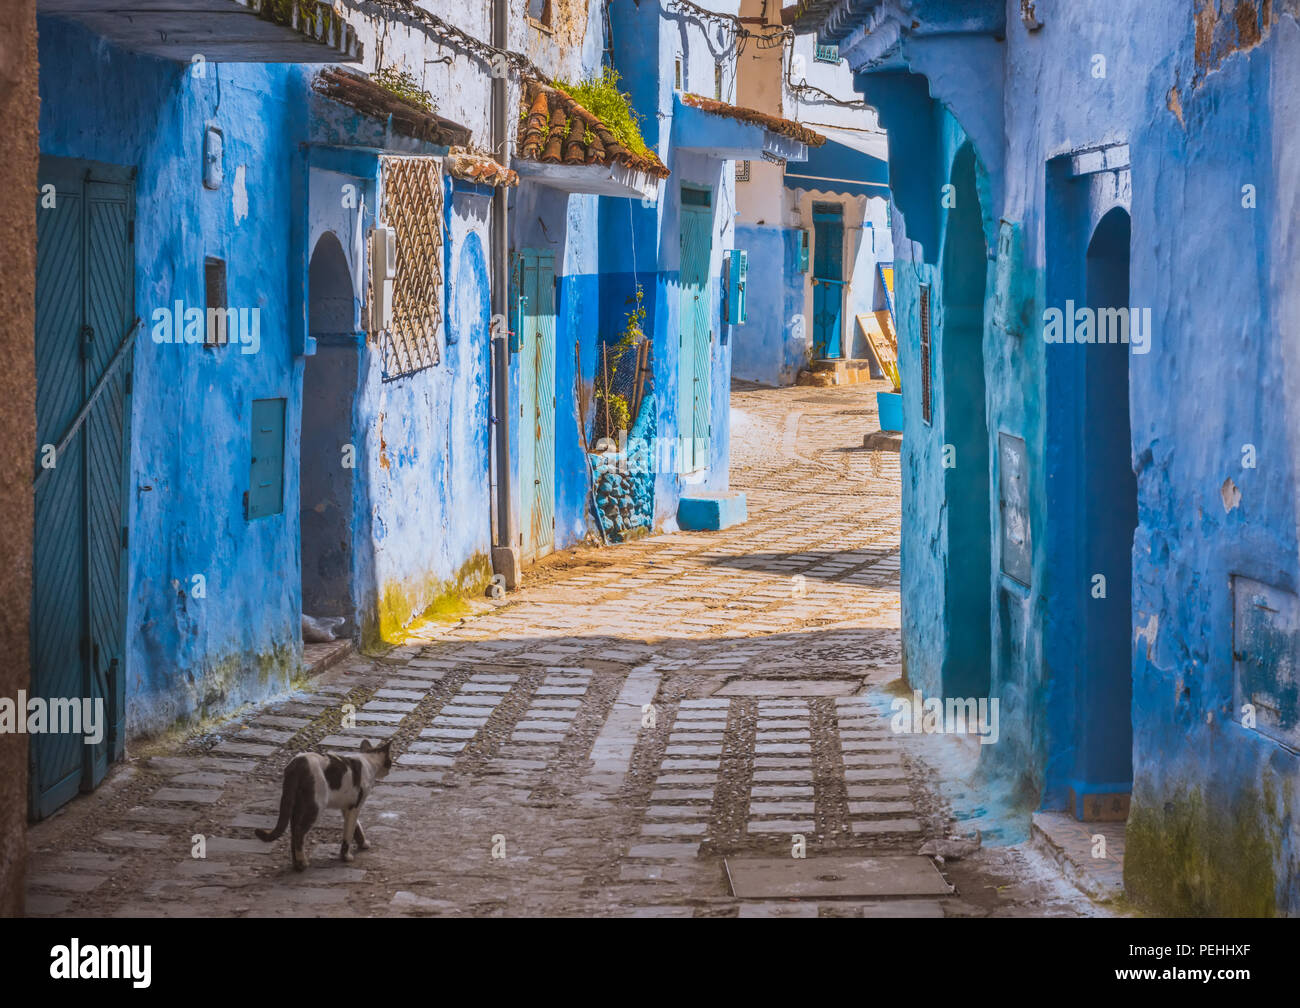 Amazing street view of blue city Chefchaouen. Location: Chefchaouen, Morocco Stock Photo